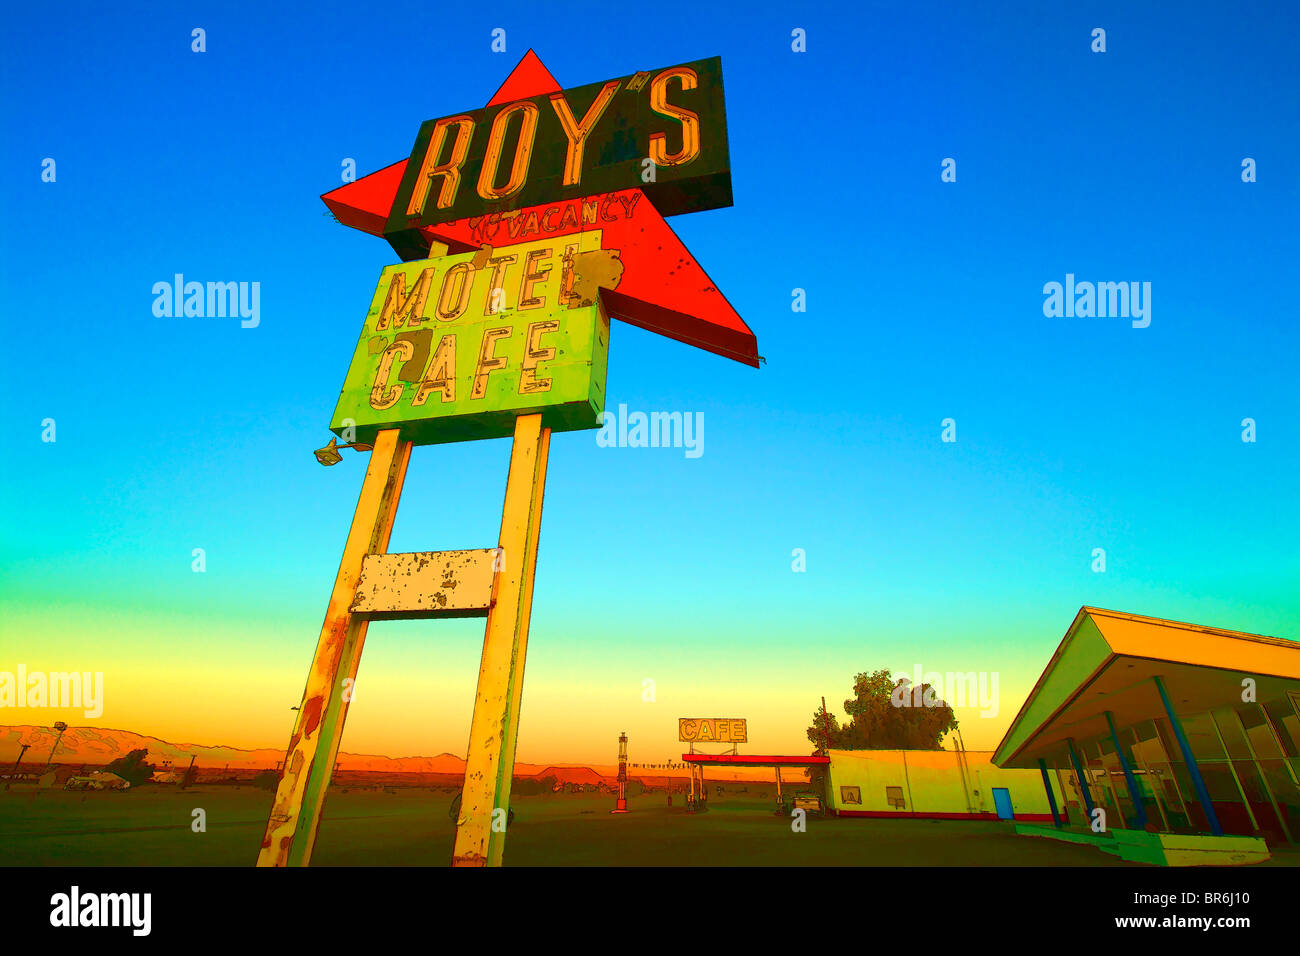 Roy’s Motel-Café sign, Old Route 66, Amboy, CA, USA Stock Photo